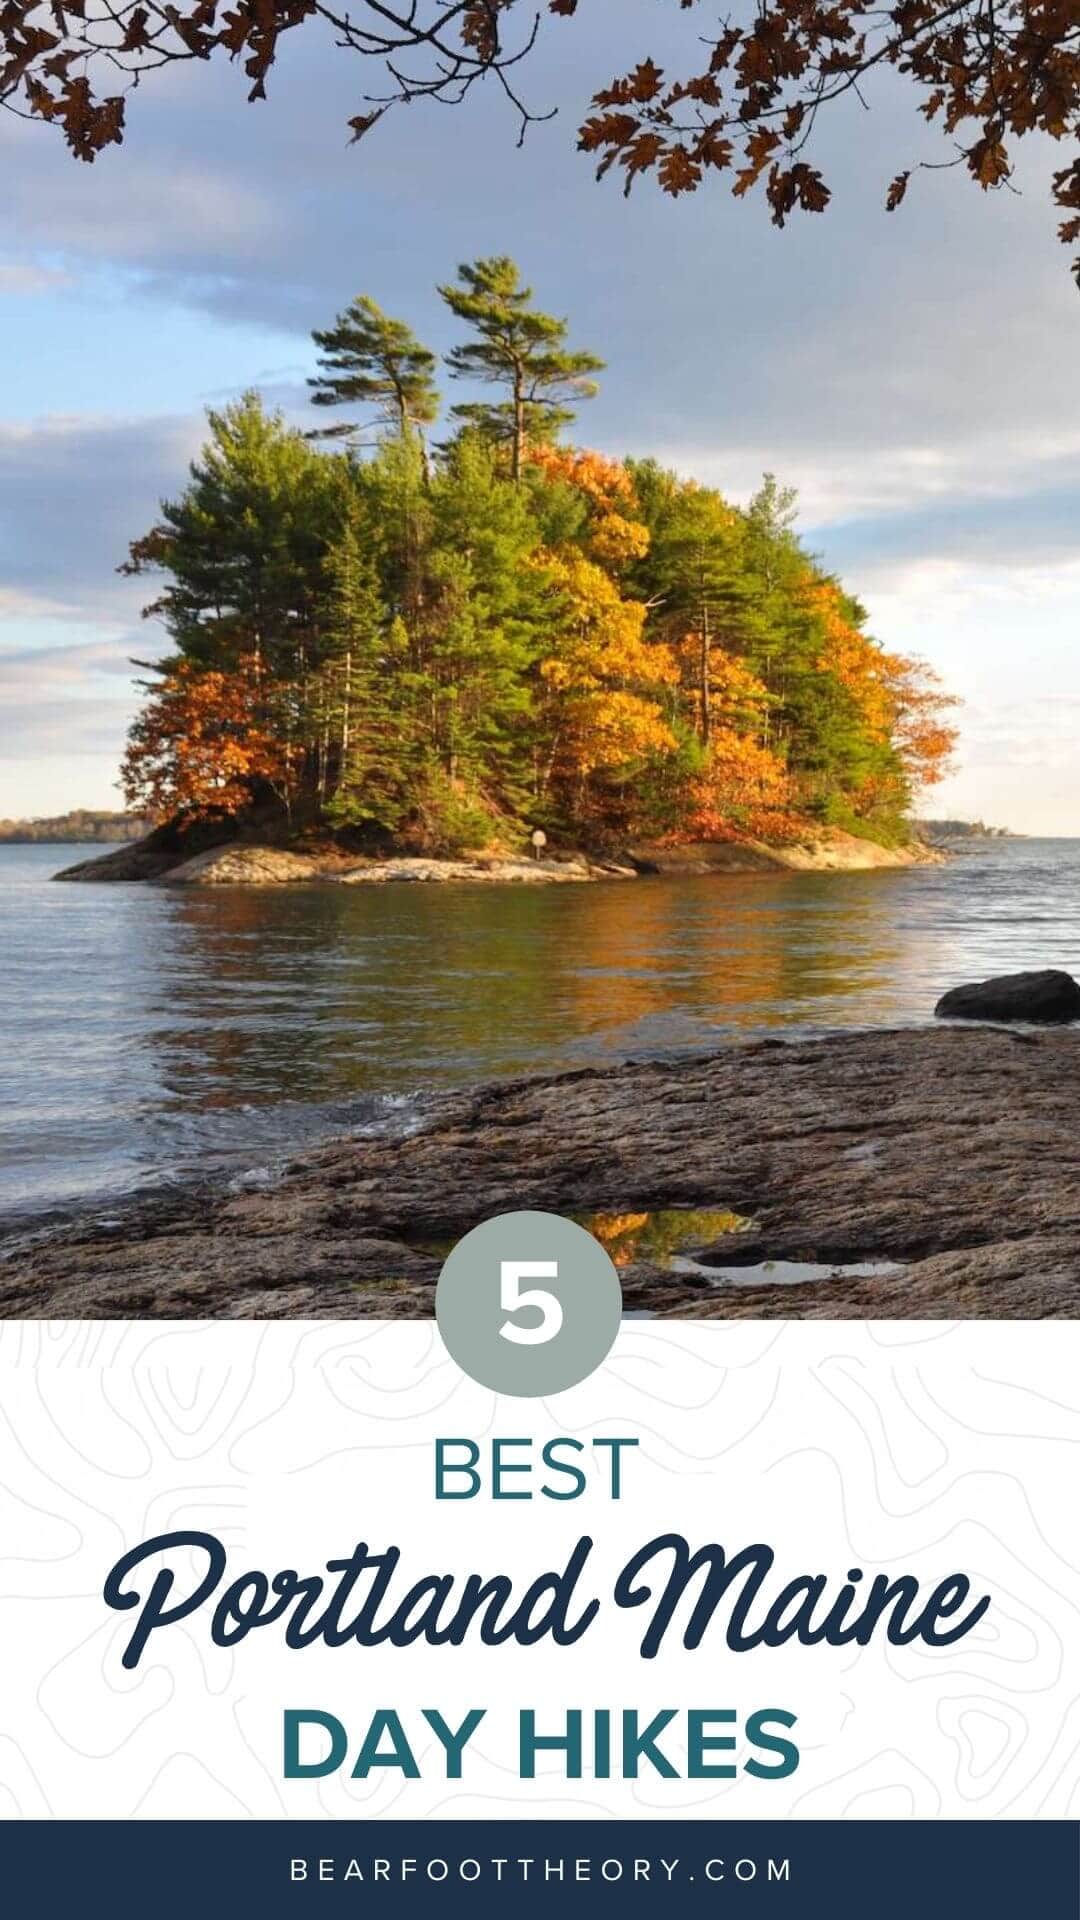 Discover 5 of the best hikes near Portland, Maine for beautiful coastal scenery and mountain views that are just a short drive from the city.